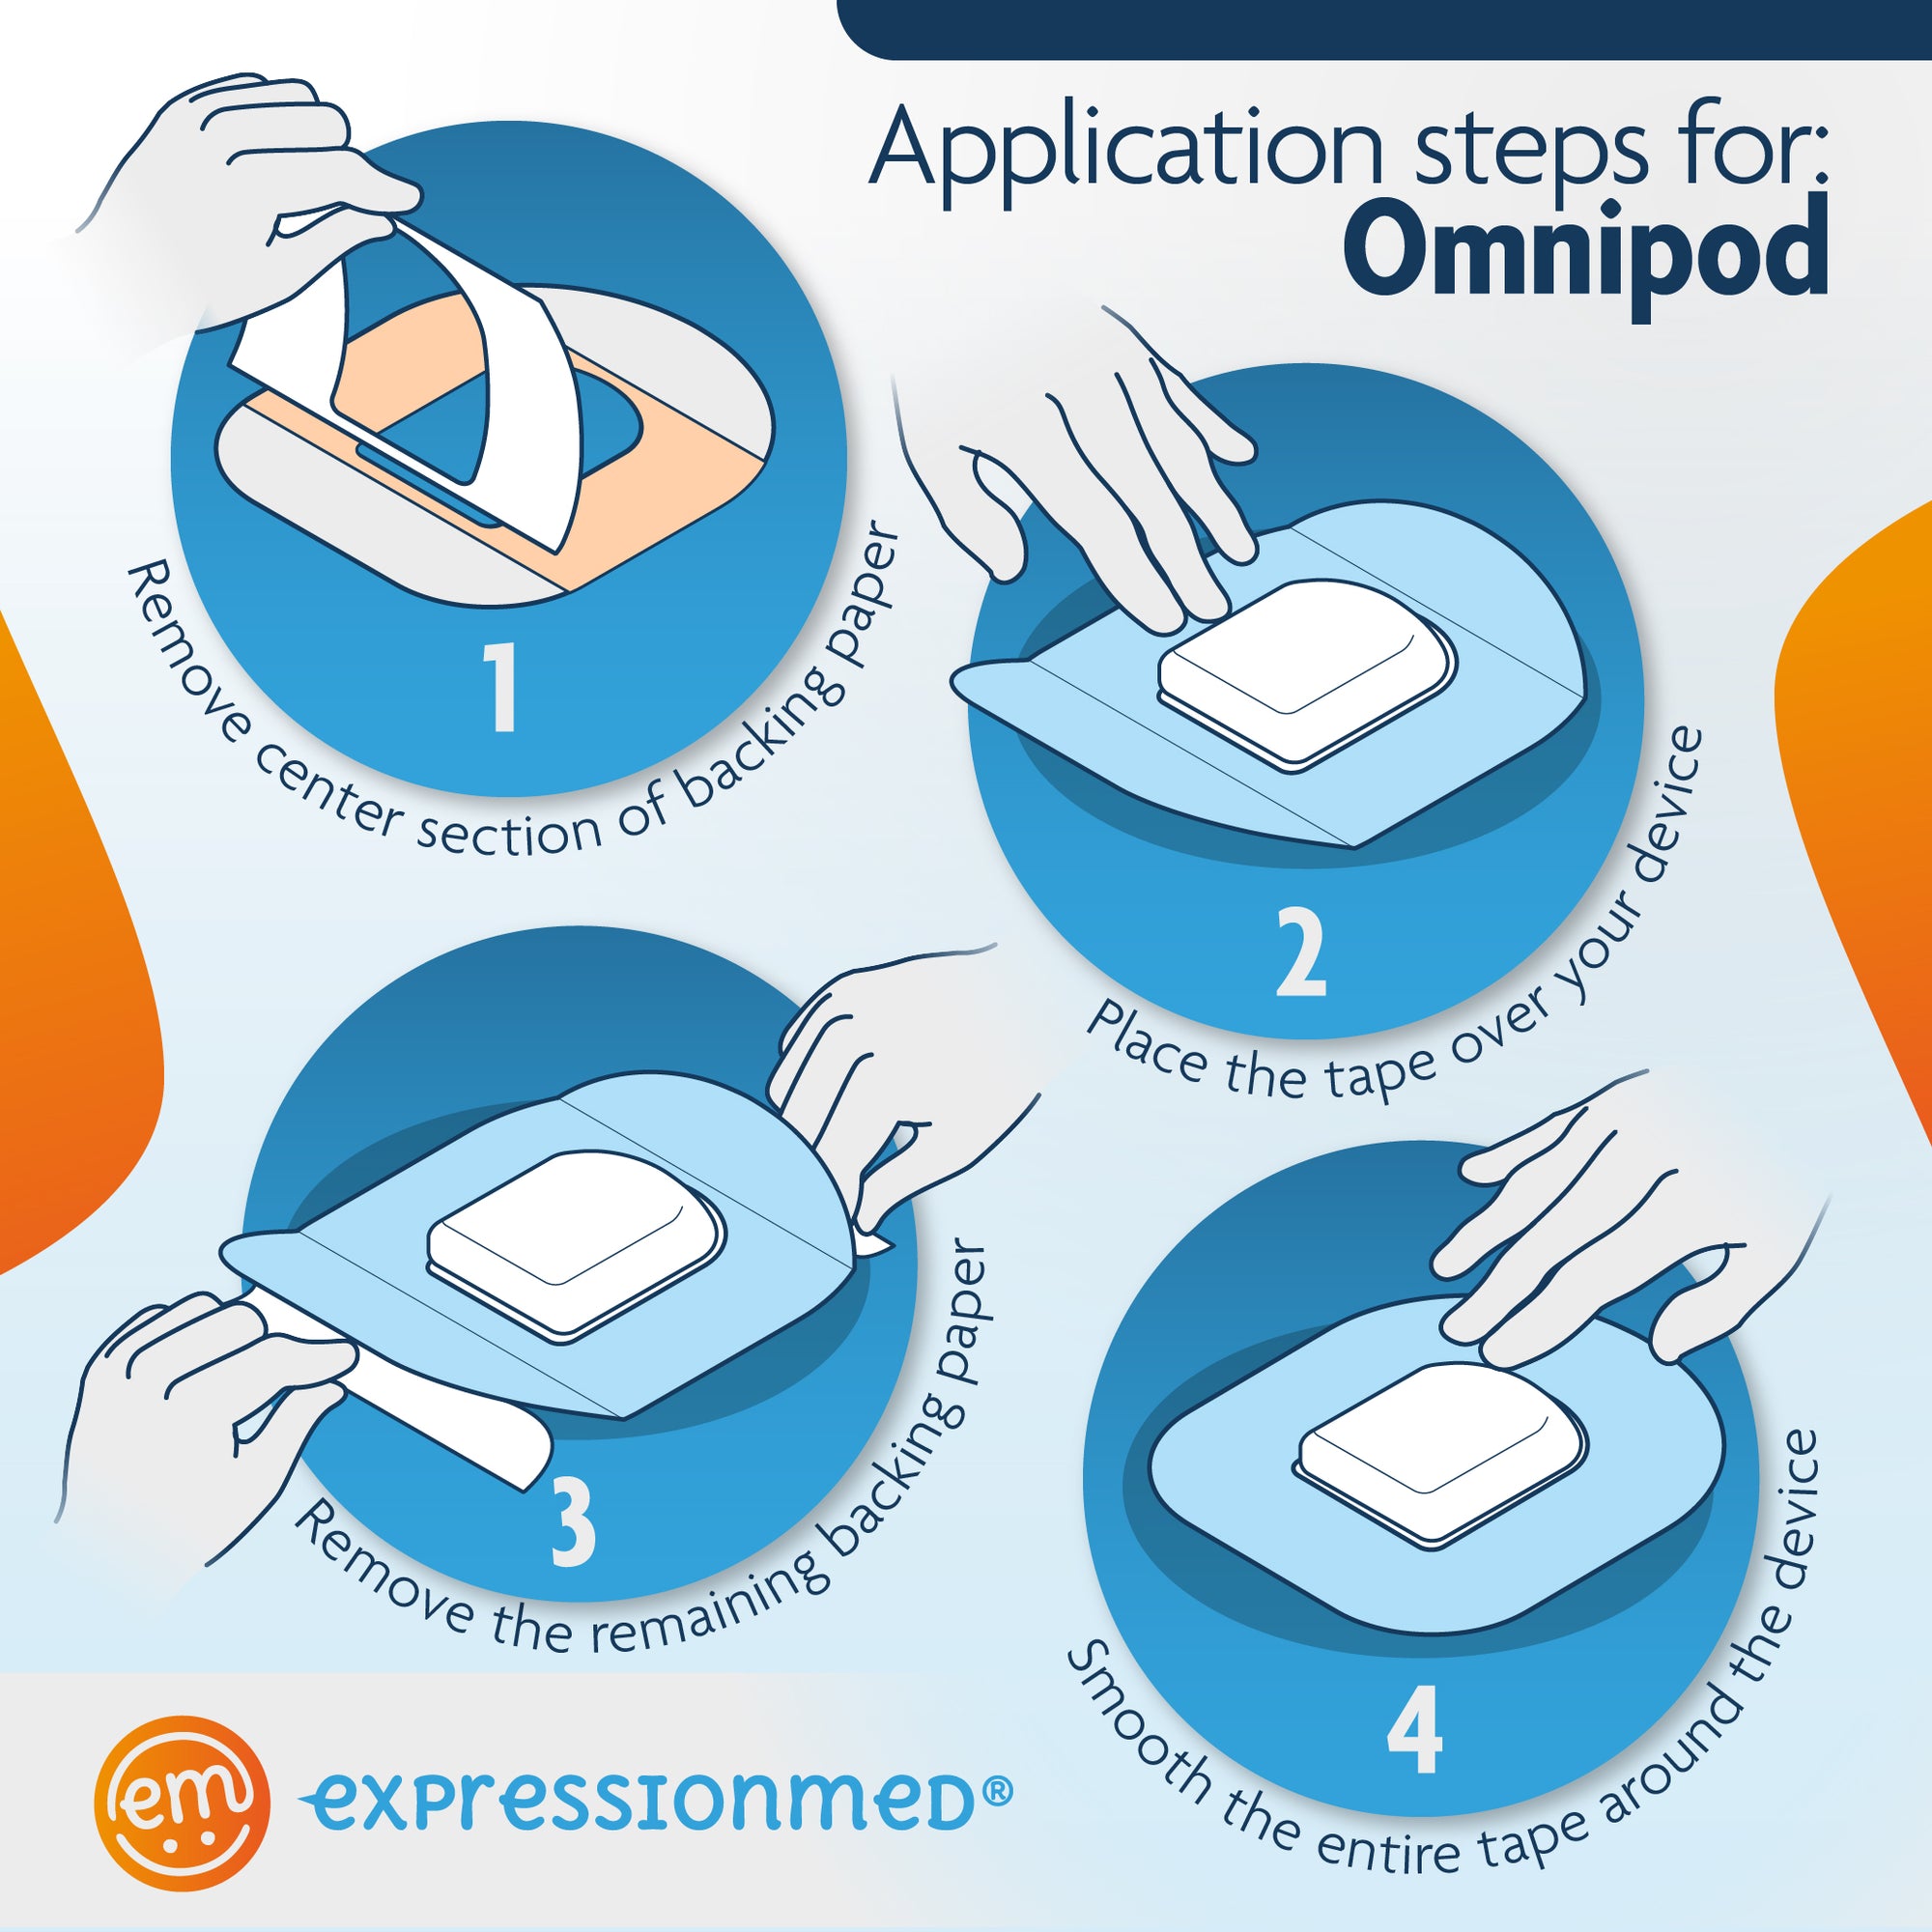 Omnipod Adhesive Tape Application instructions